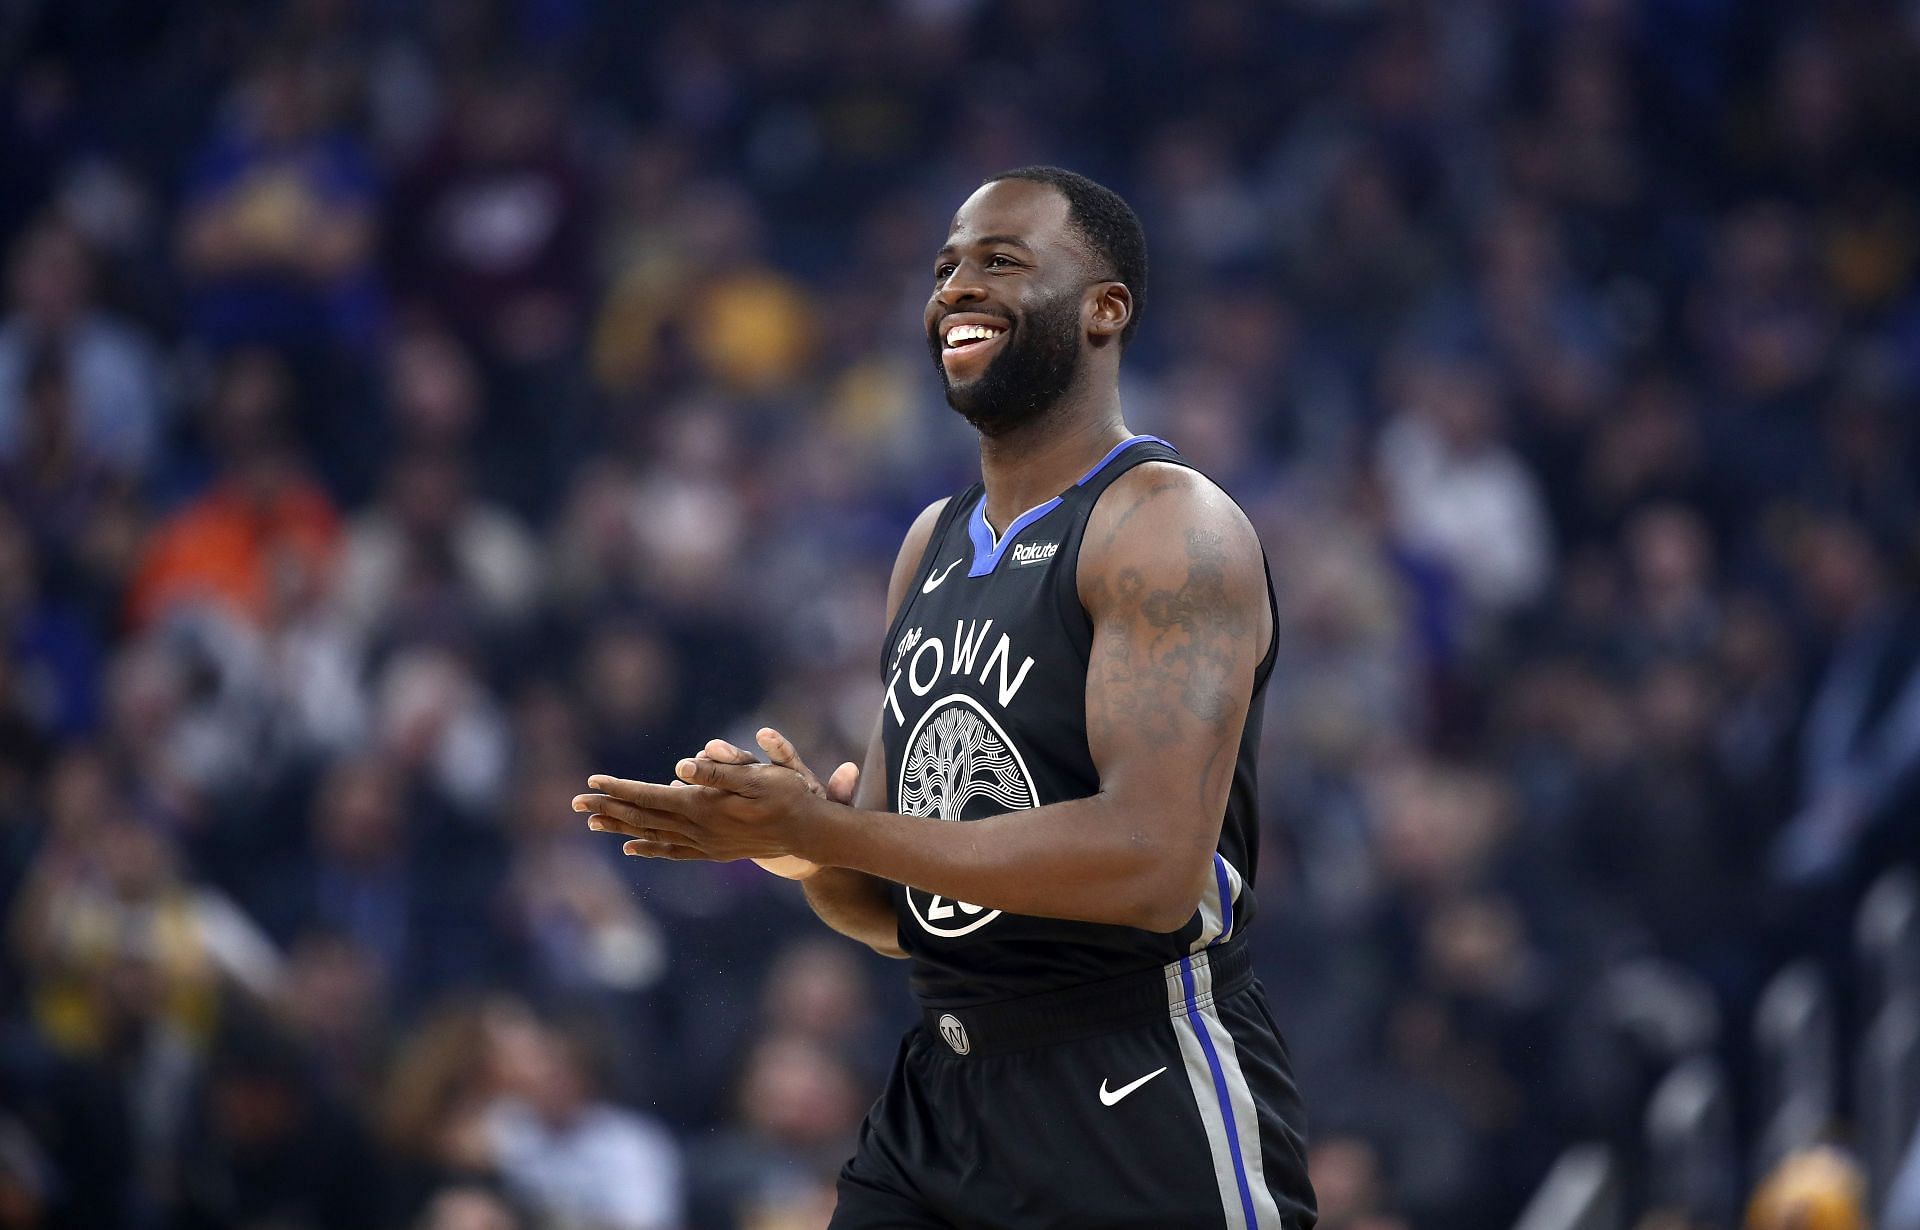 Draymond Green continues to be the heart of the Golden State Warriors